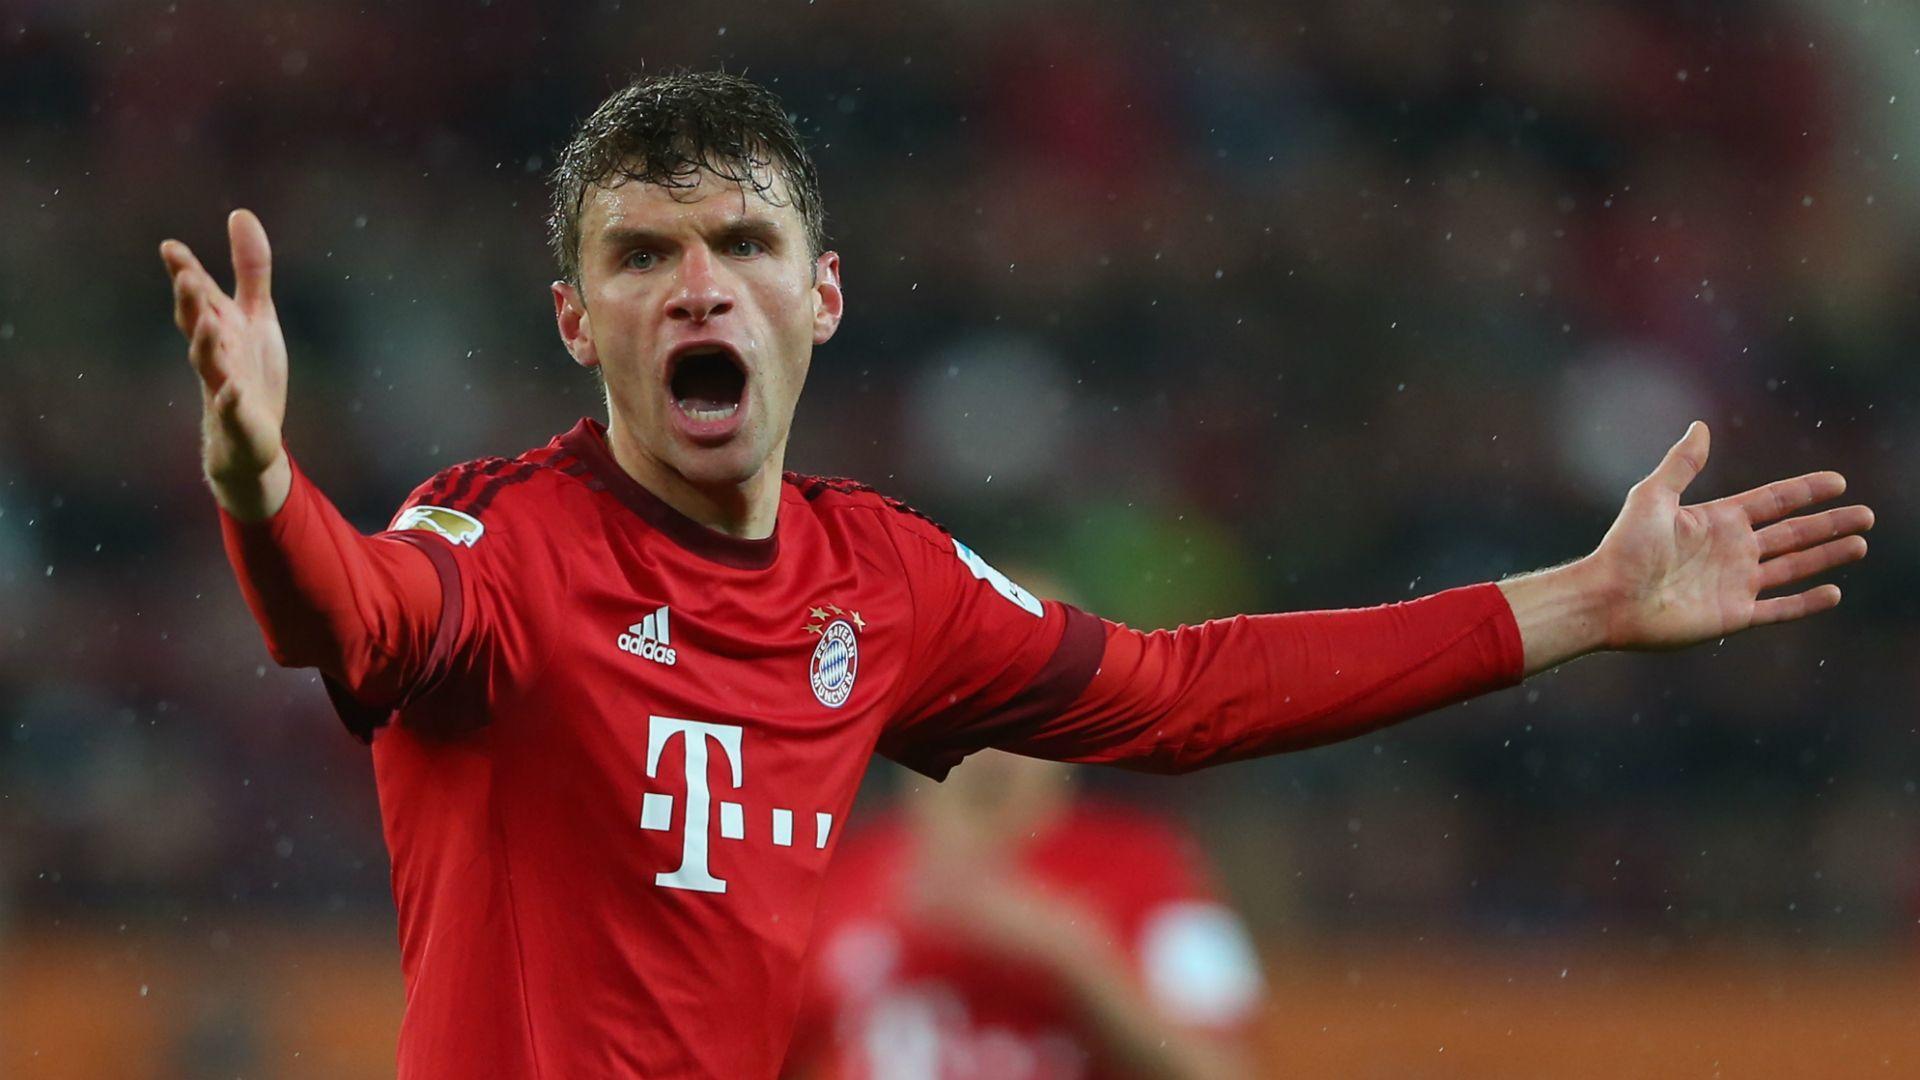 Thomas Muller Wallpaper Image Photo Picture Background